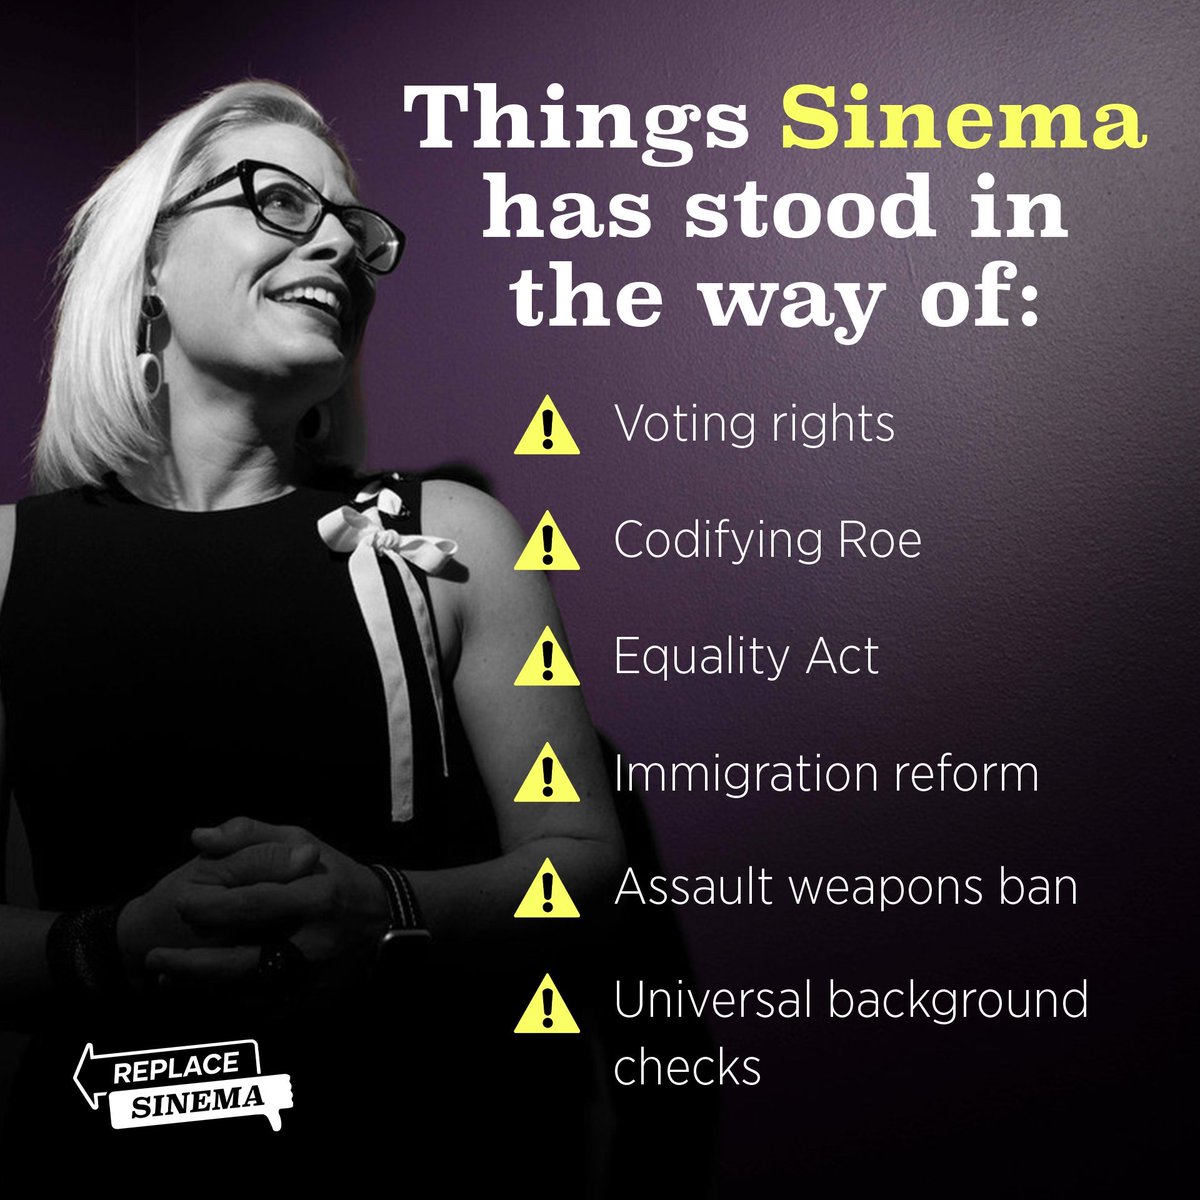 Time and again, Sinema obstructed progress for hardworking Arizonans. Instead, she’s done the bidding of Republicans and her corporate donors.

We’ve had enough—and we’re going to replace her.